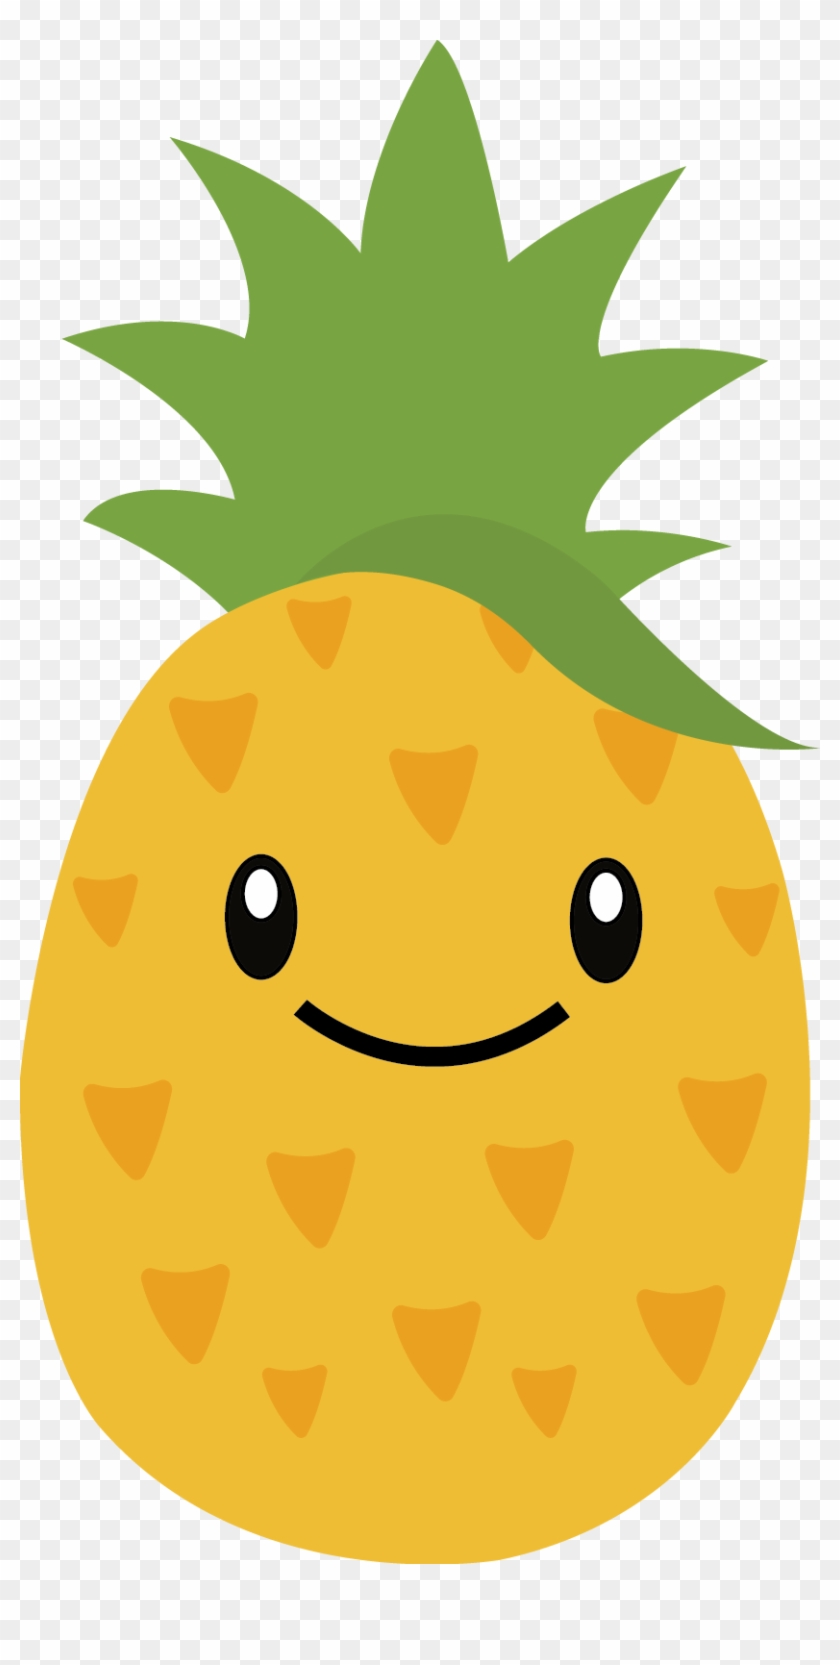 Pineapple - Cool Pineapple Png #633035